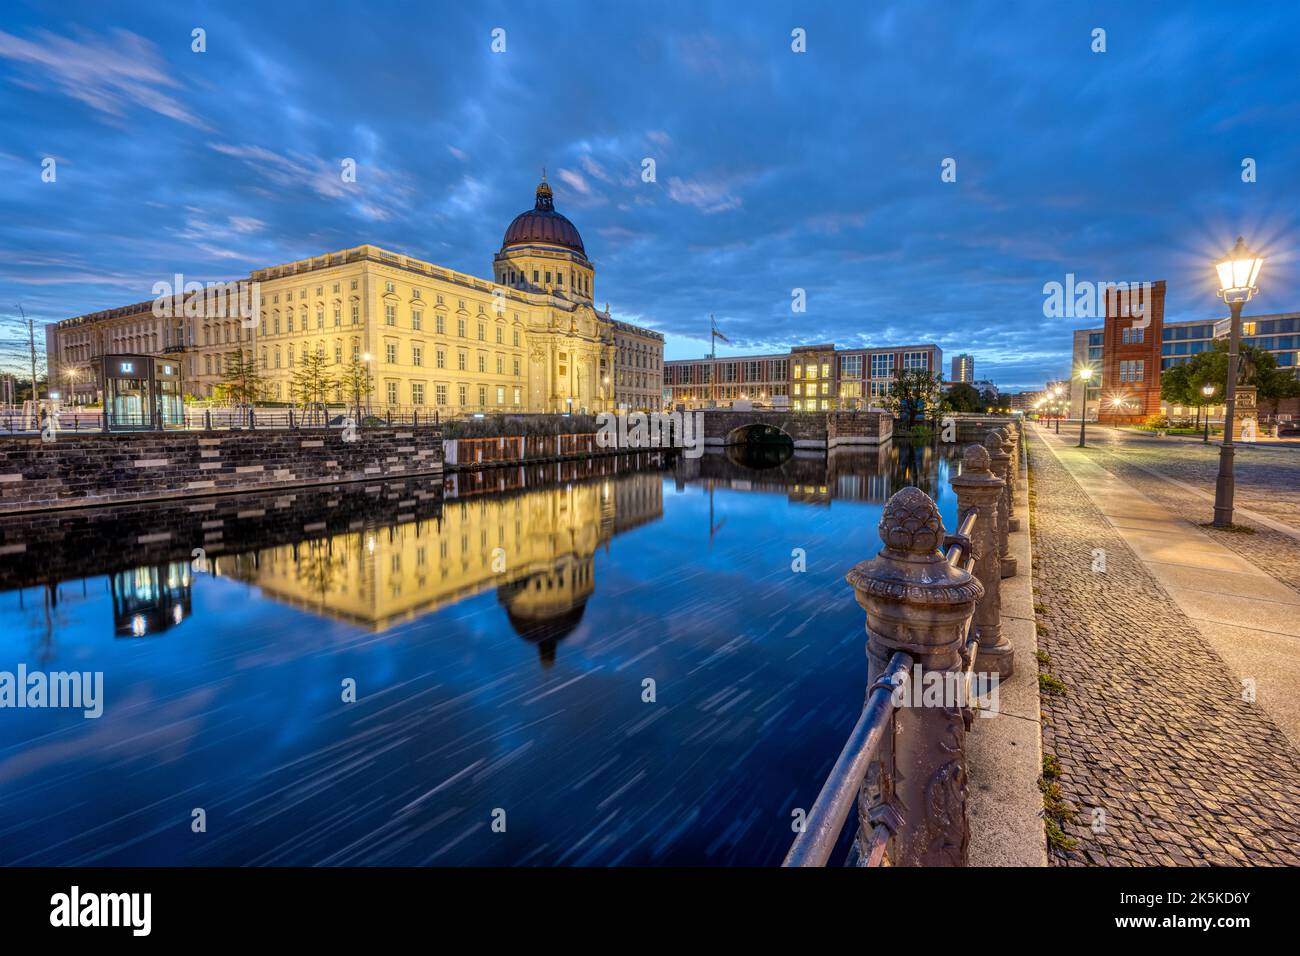 The rebuilt Berlin City Palace reflected in a small canal before sunrise Stock Photo